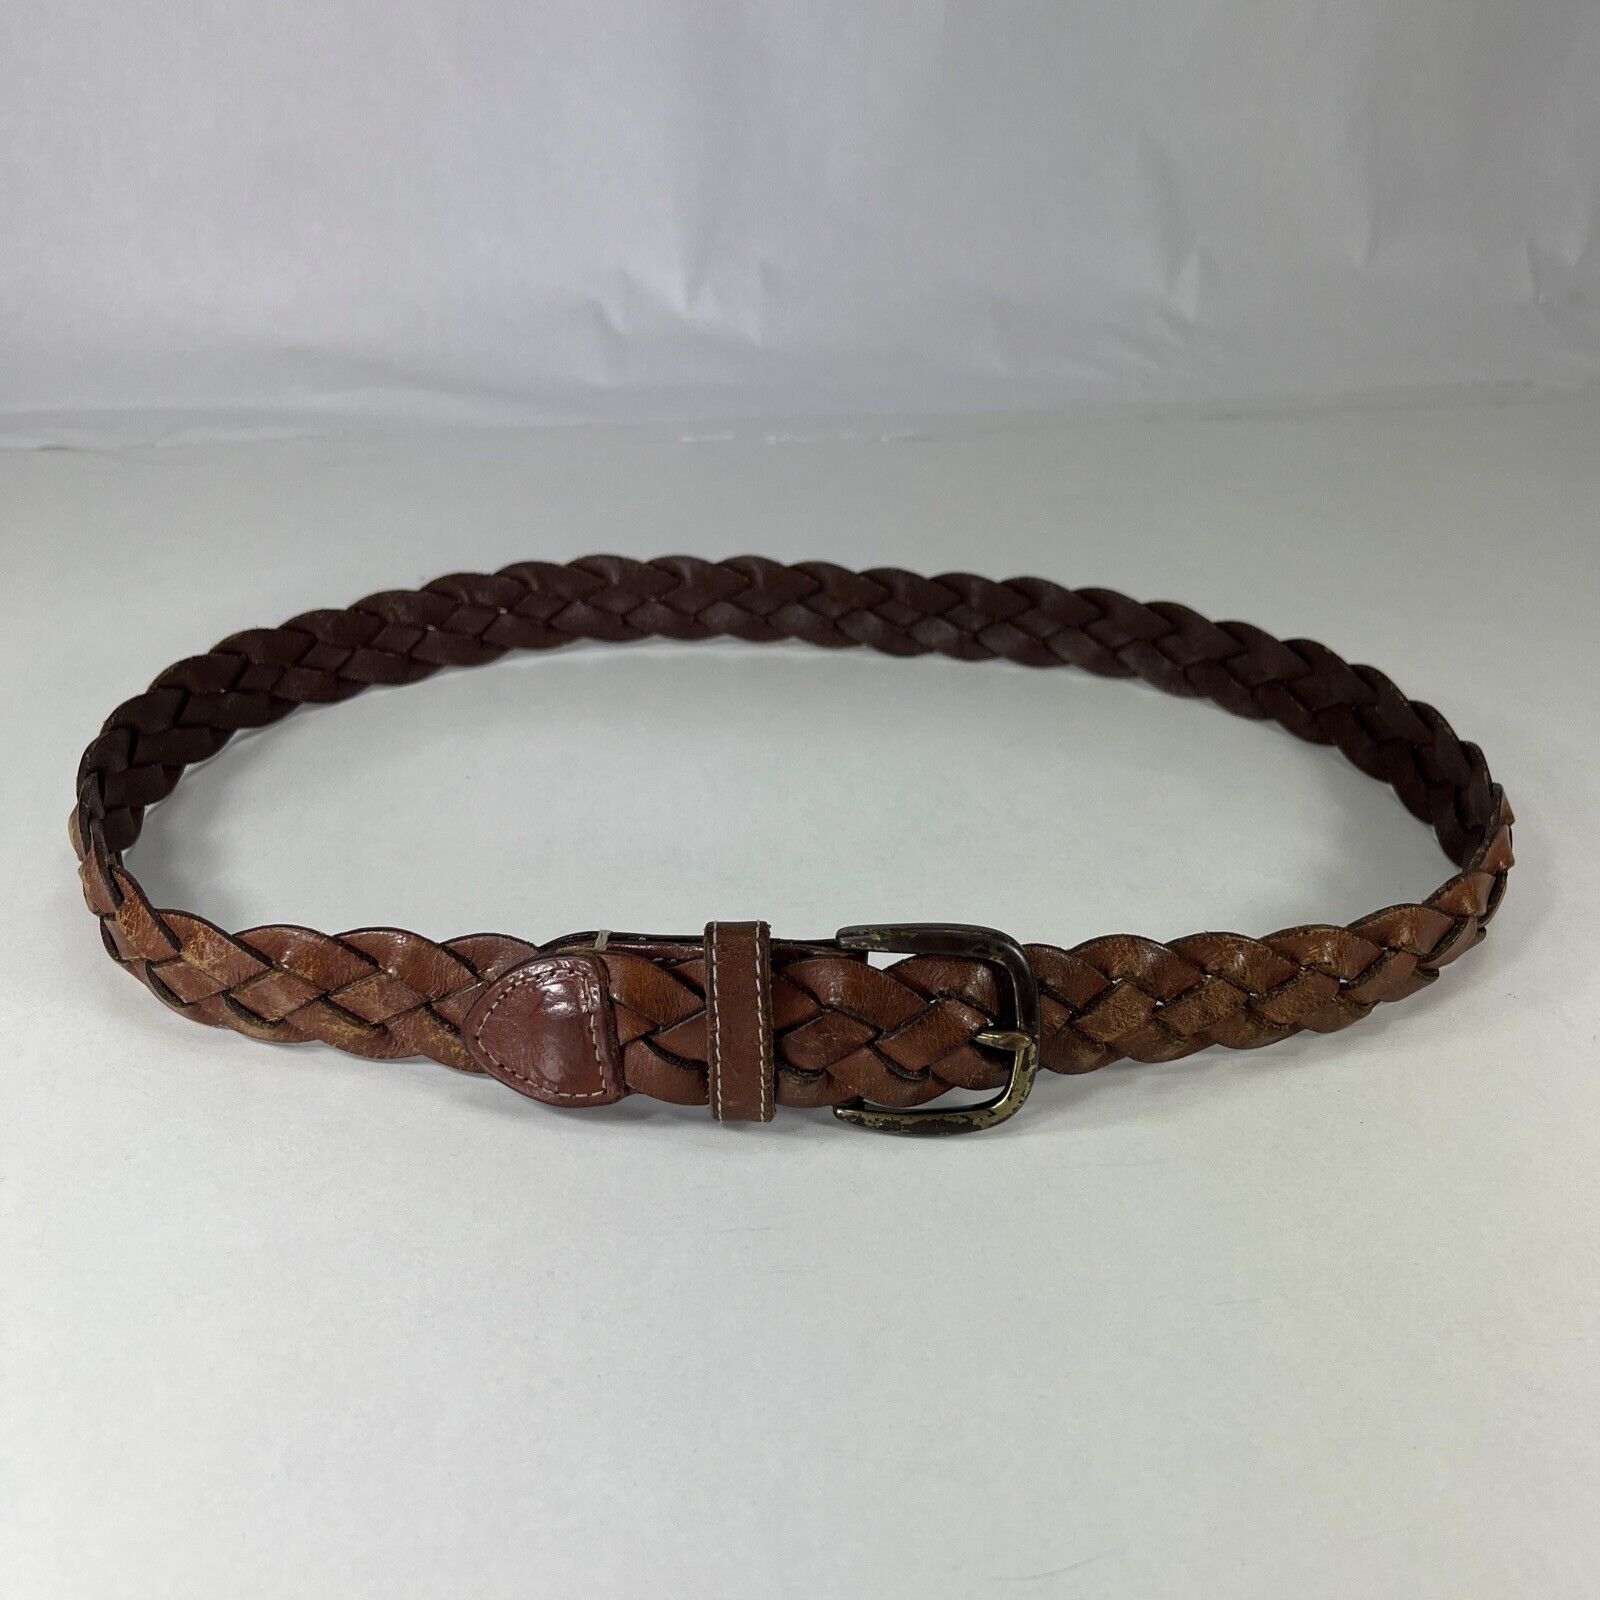 Lands' End Worn Brown Cow Leather Braided Belt - Men's Size 30